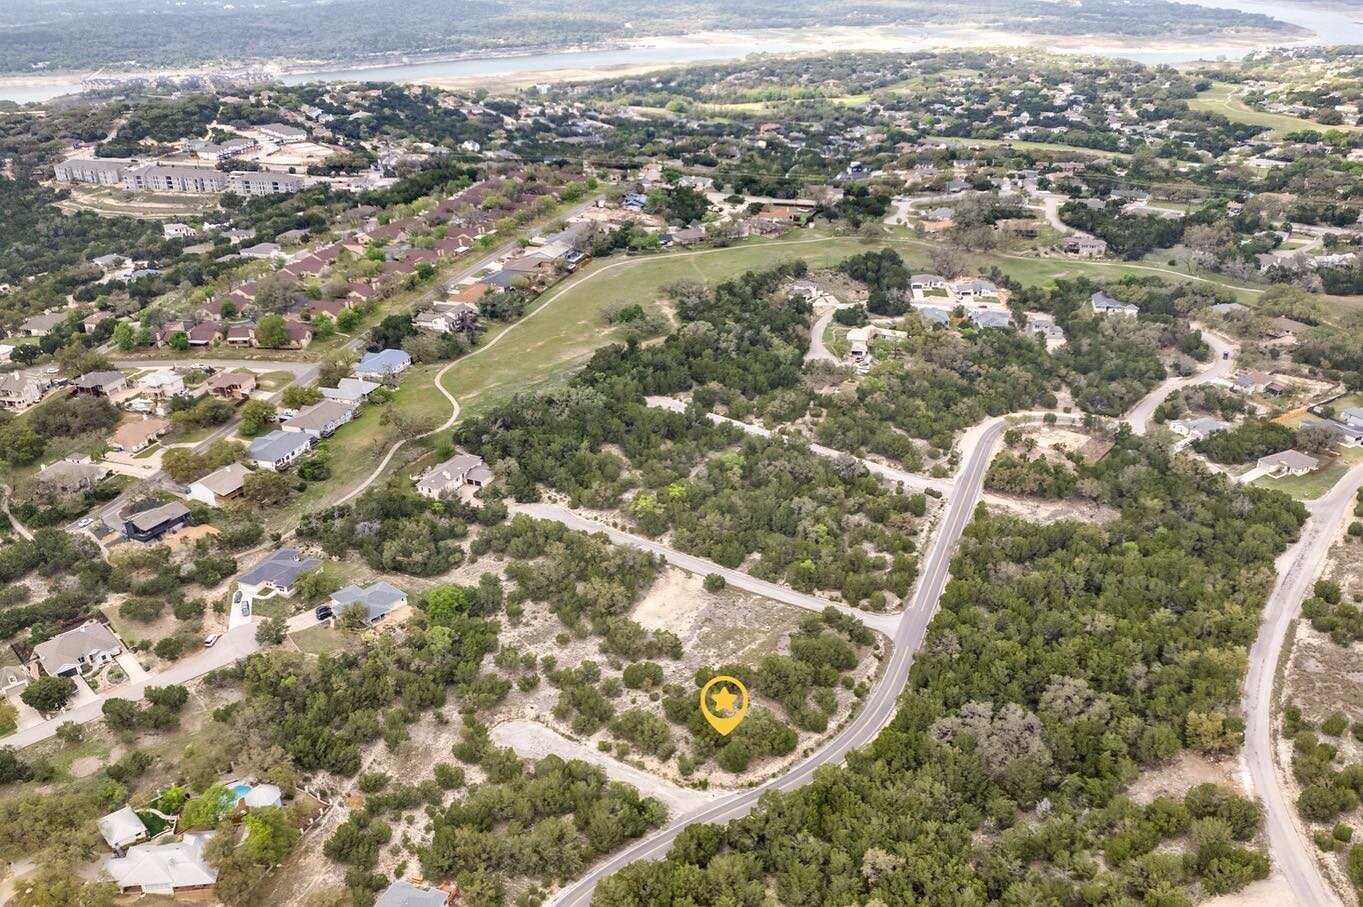 JUST LISTED! Gorgeous 0.27 acre lot for sale in Lago Vista, the north shore of Lake Travis. Gentle sloping topography for those nice, canyon views. Lago Vista POA grants you private waterfront park access and many more amenities for a mere $150/yr! B